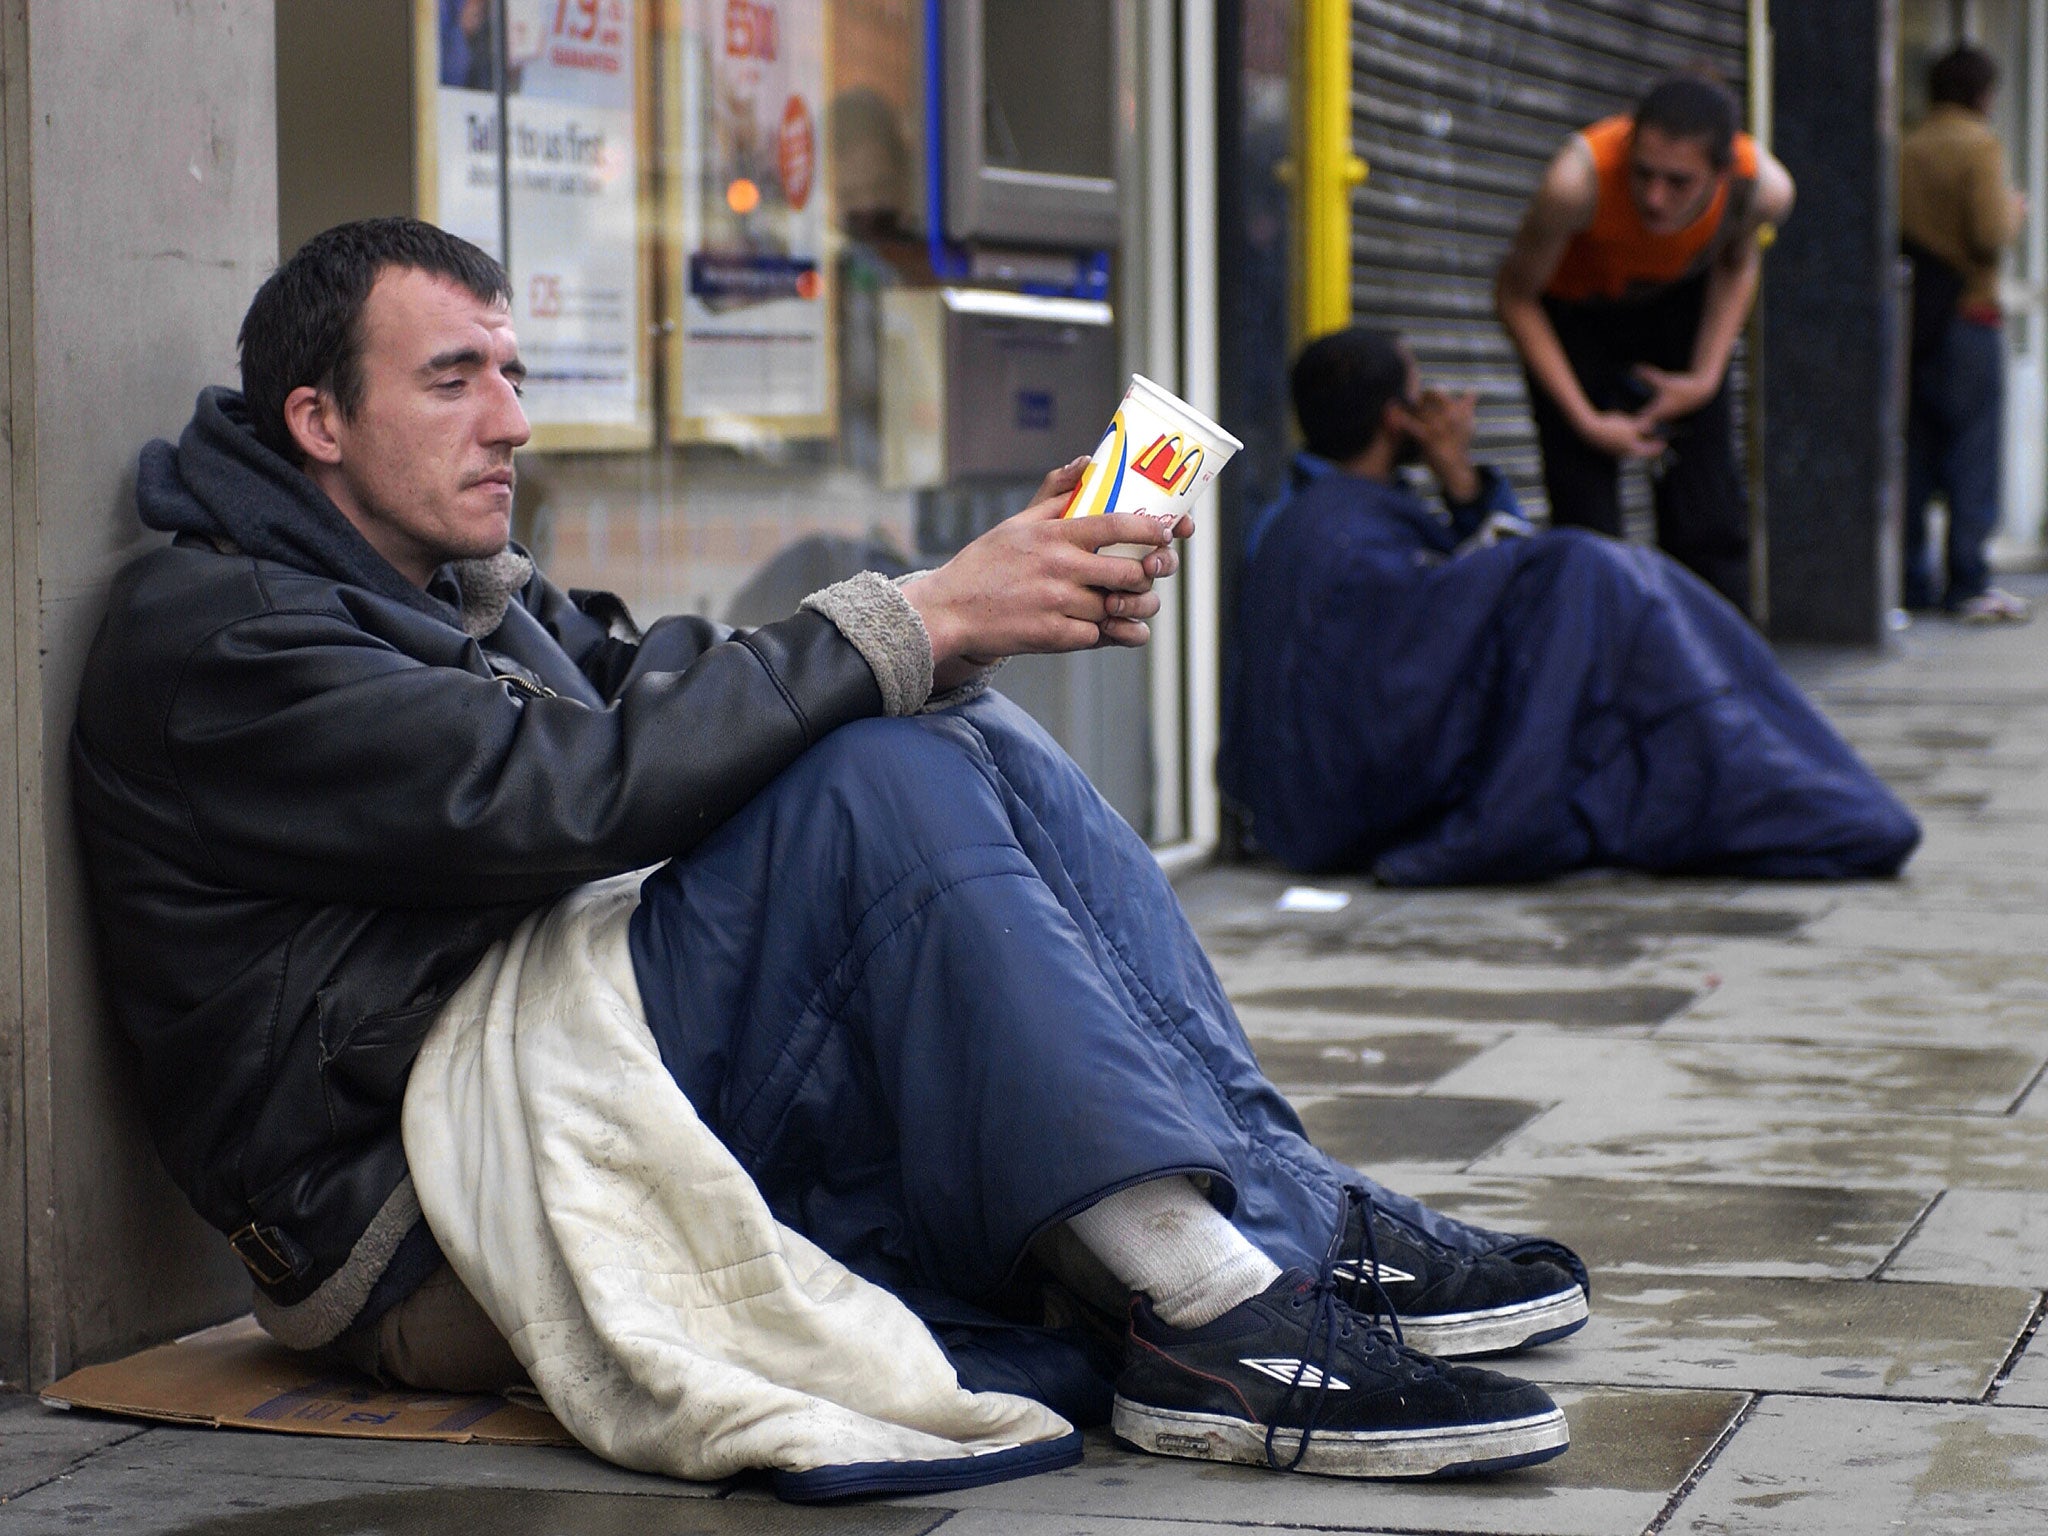 The number of rough sleepers in London has doubled in the past five years